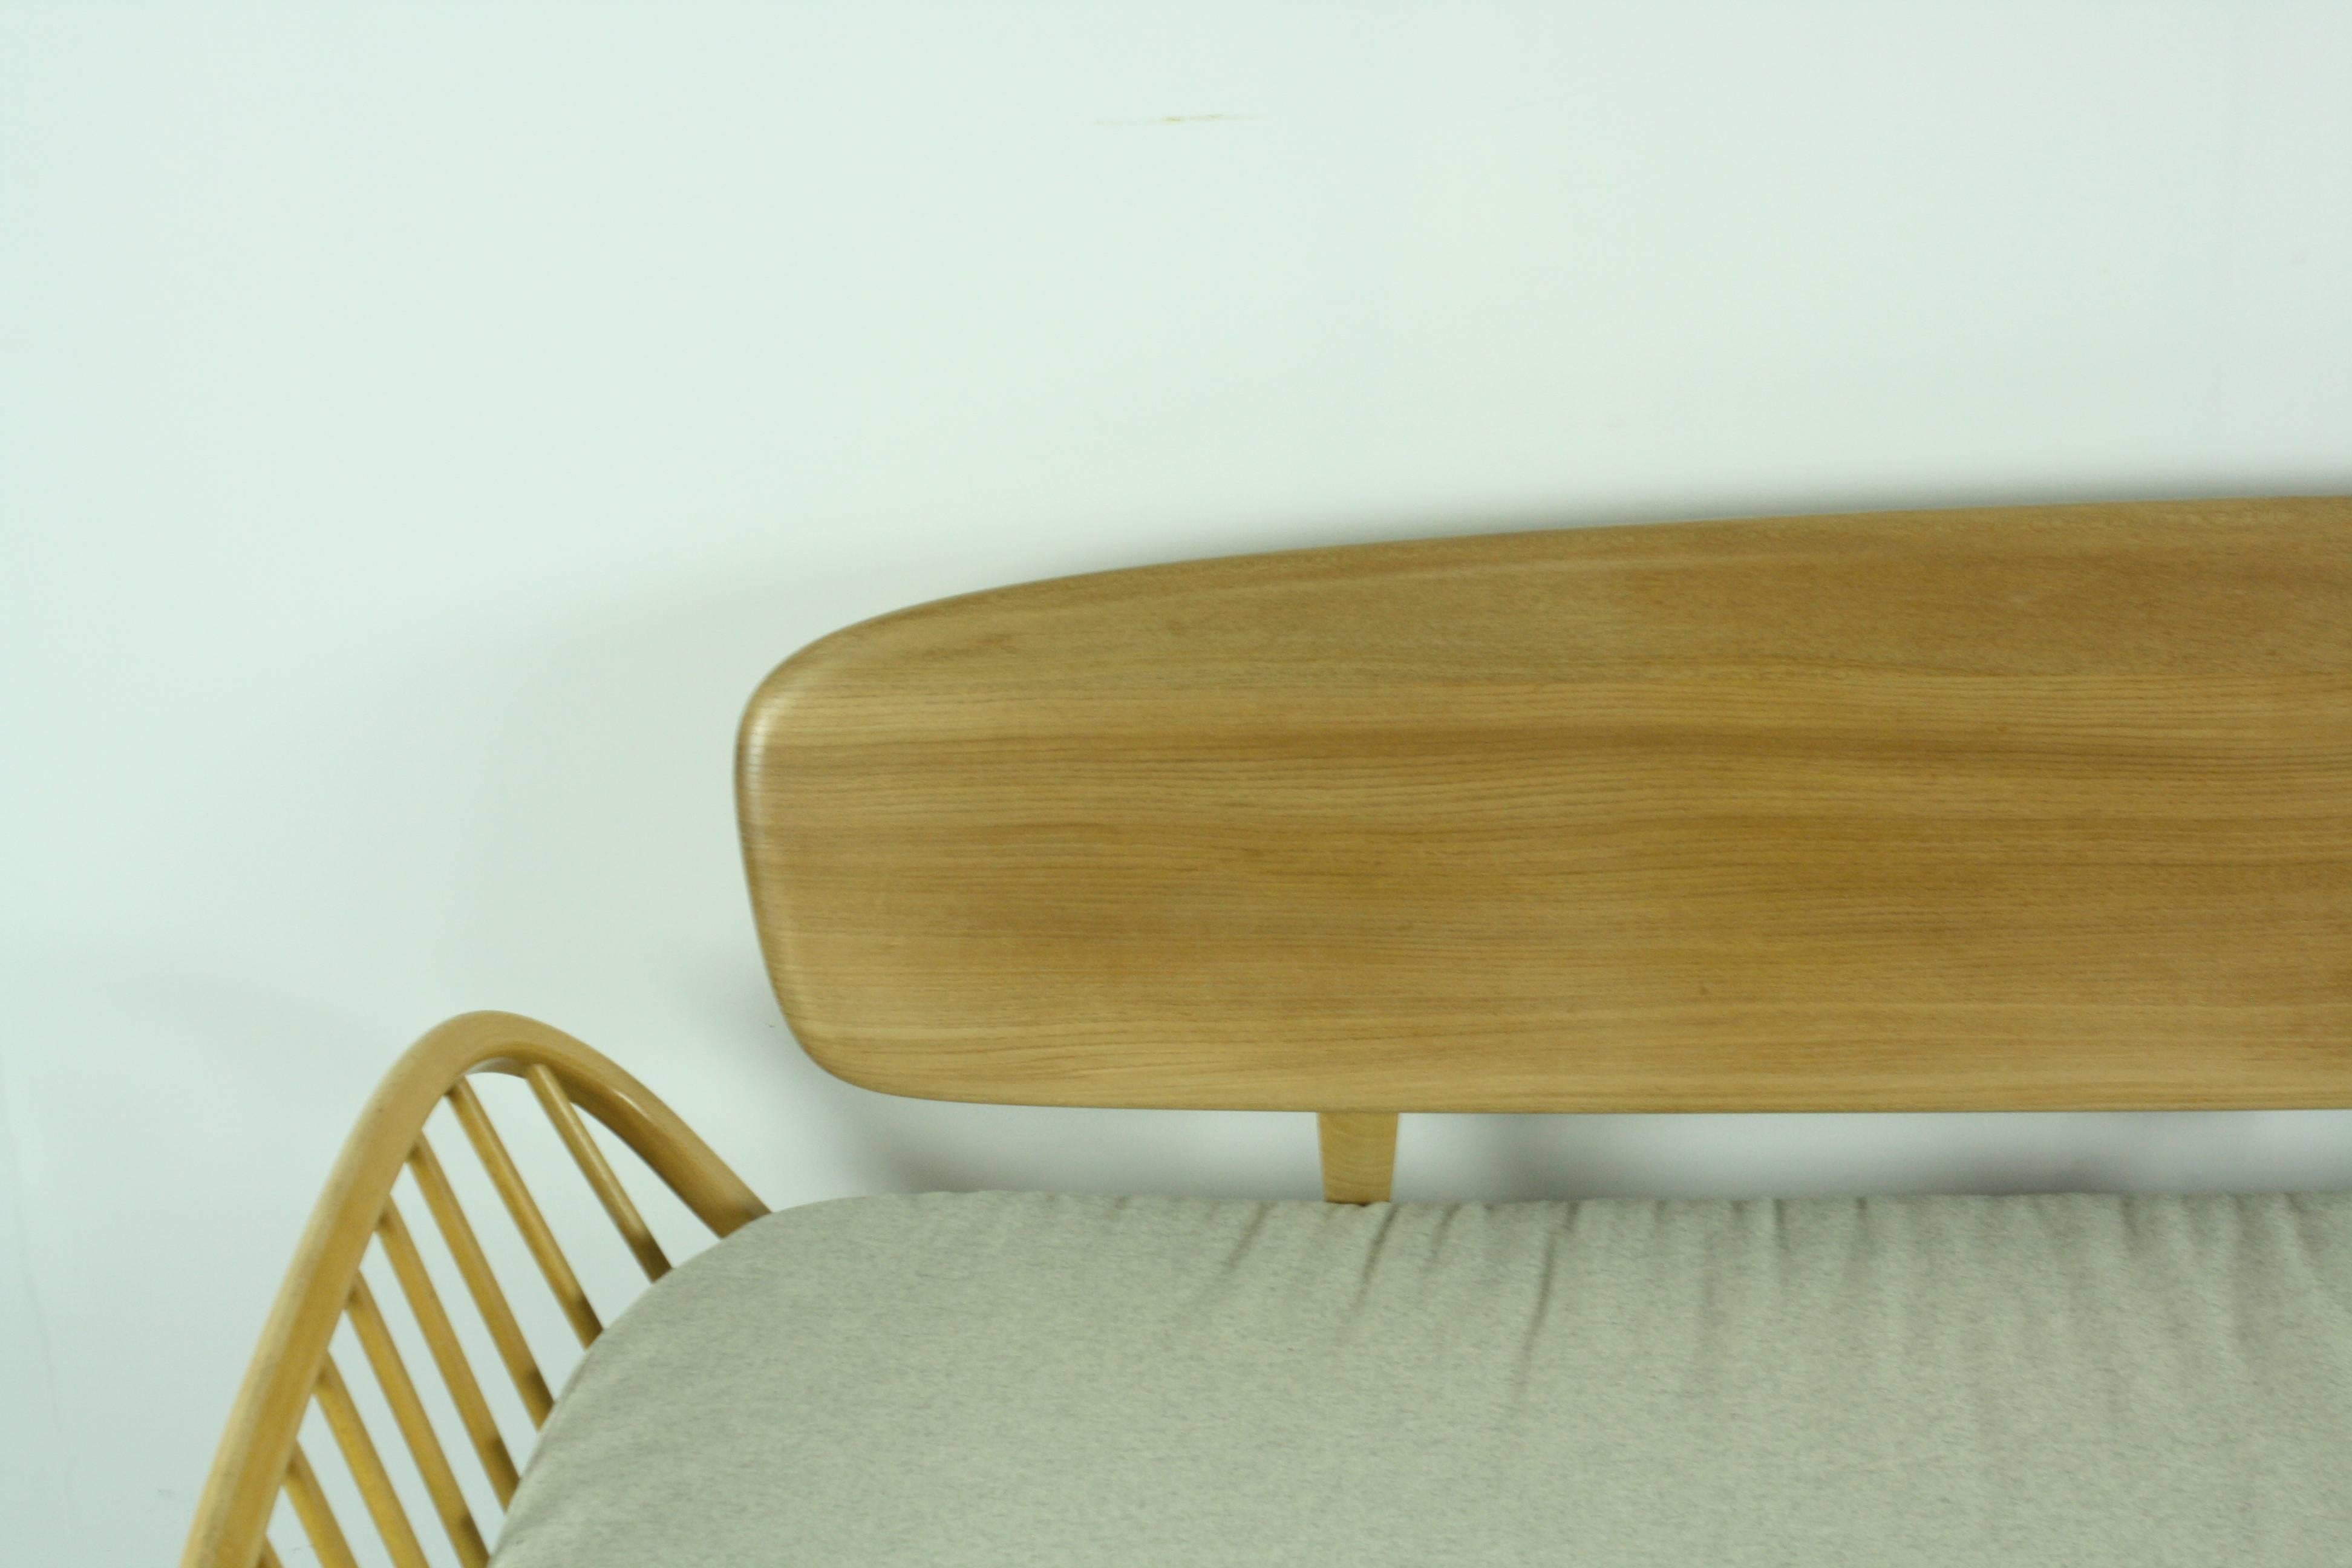 English Vintage Midcentury British Ercol 355 Studio Couch or Sofa Bed